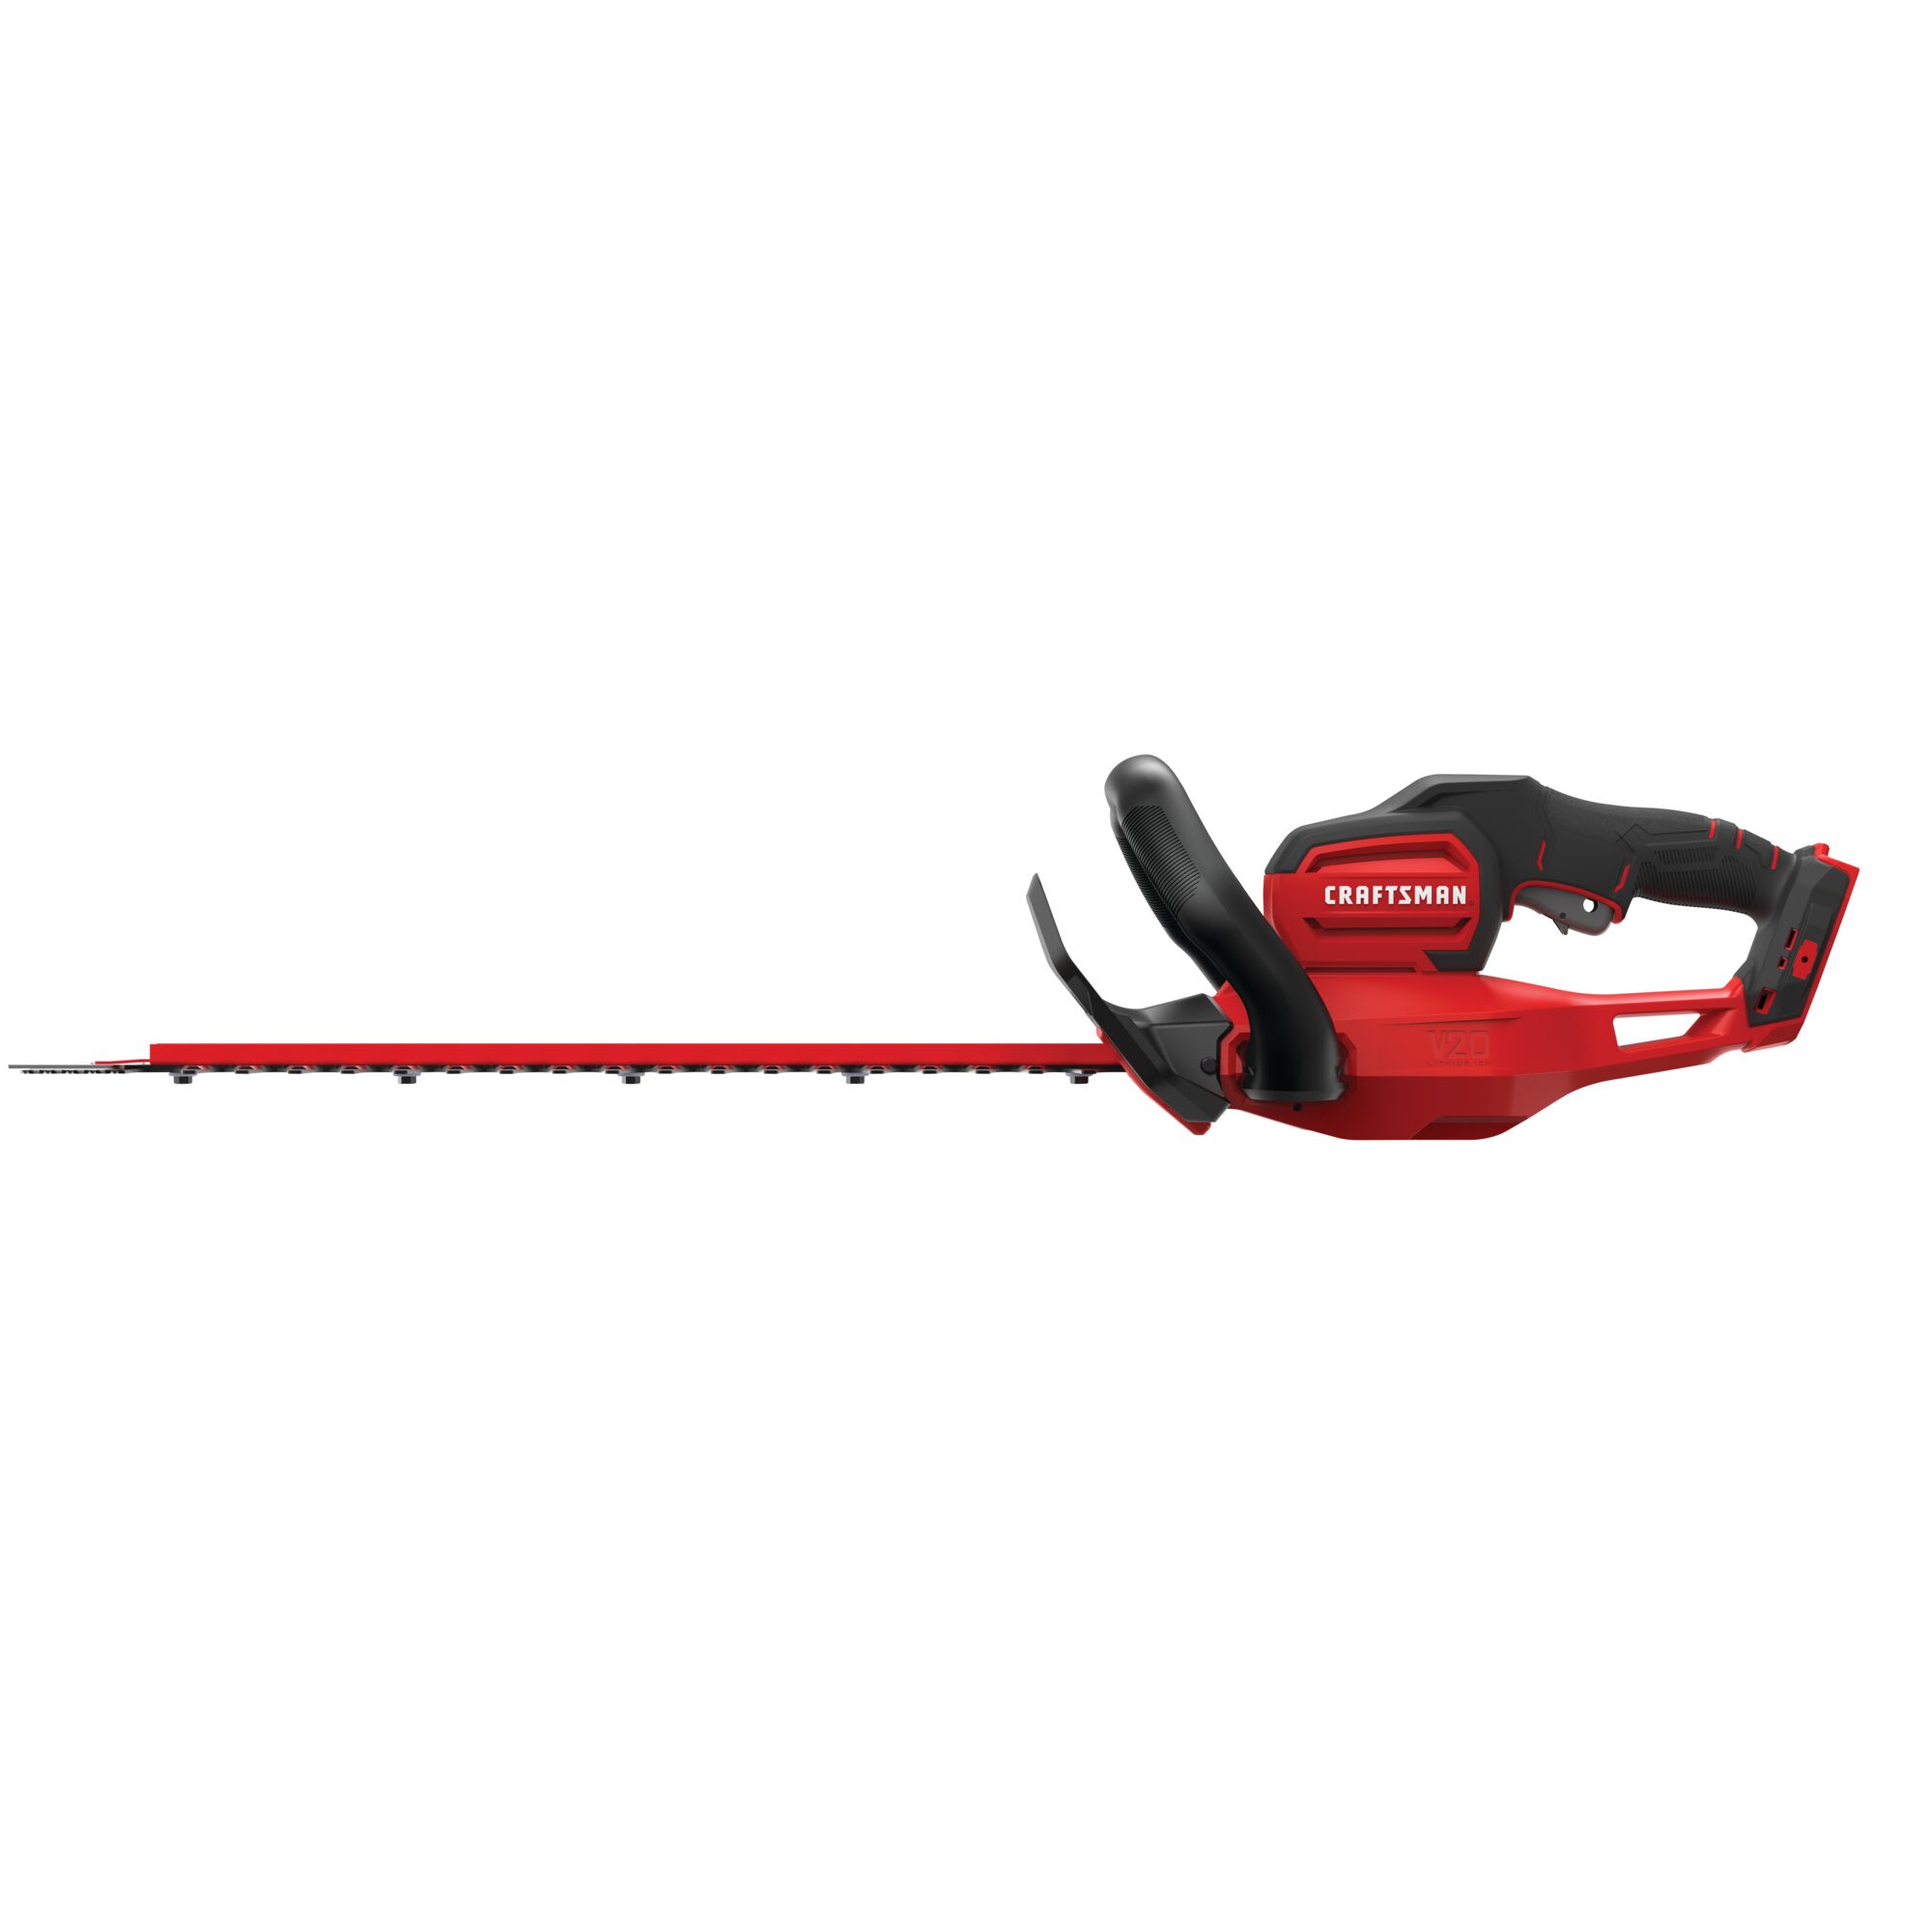 Left profile of cordless 22 inch hedge trimmer.